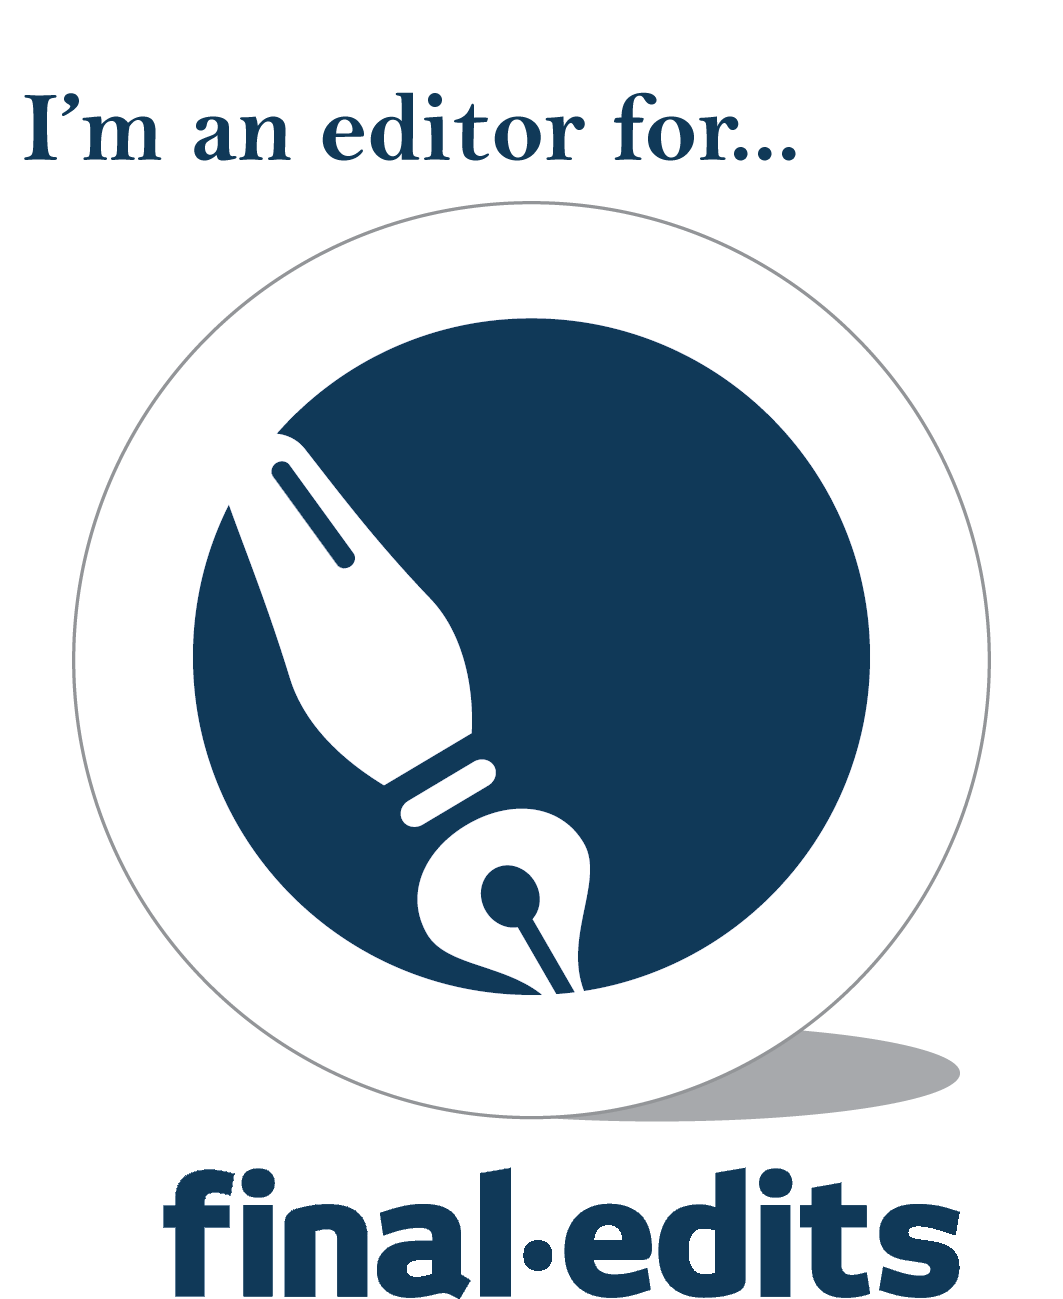 Looking for an editor?